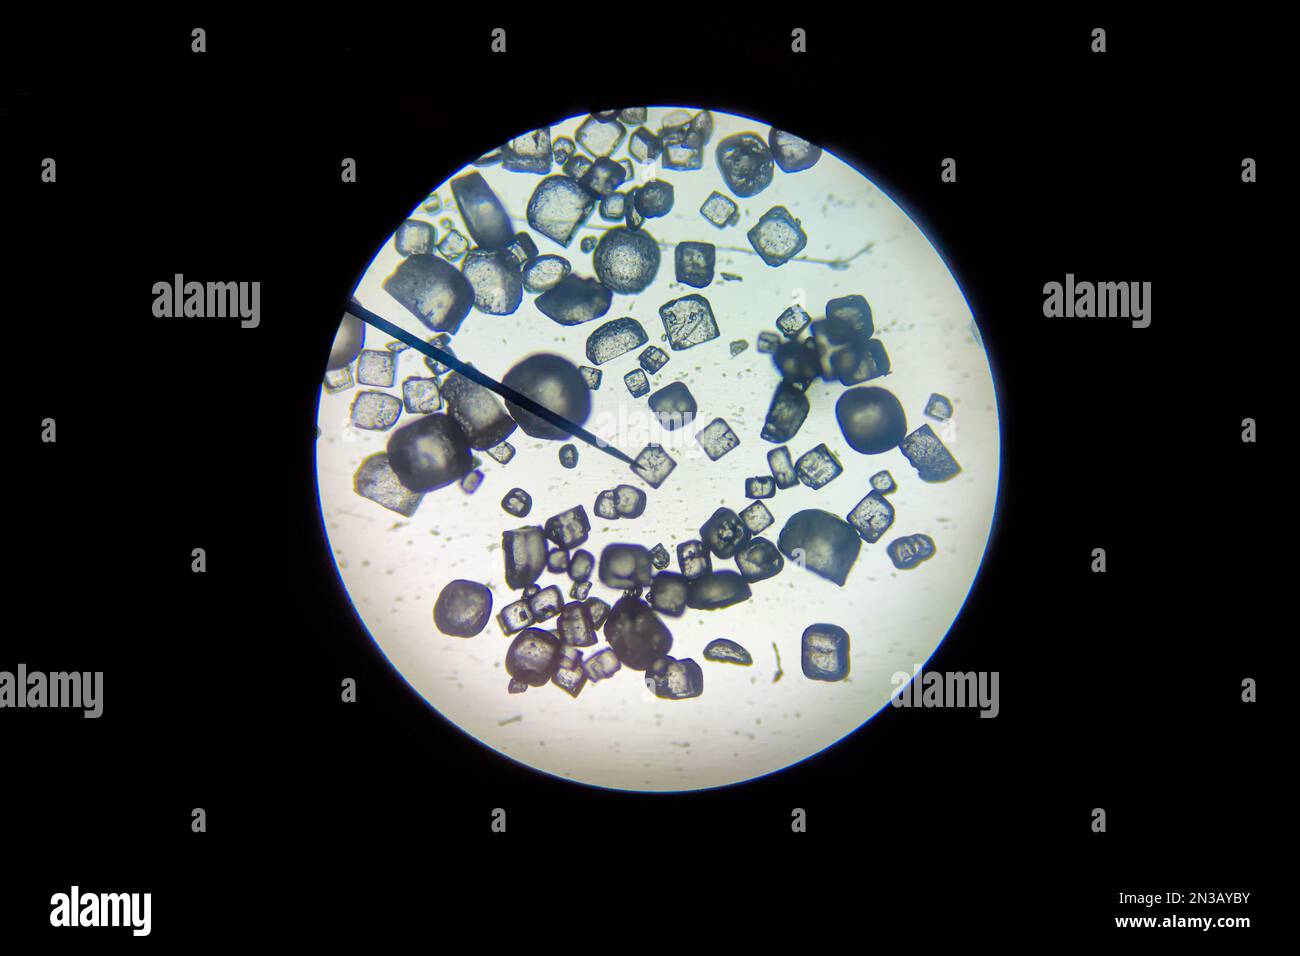 Close-up view of salt crystals (Sodium Chloryde) as seen through a microscope. Stock Photo